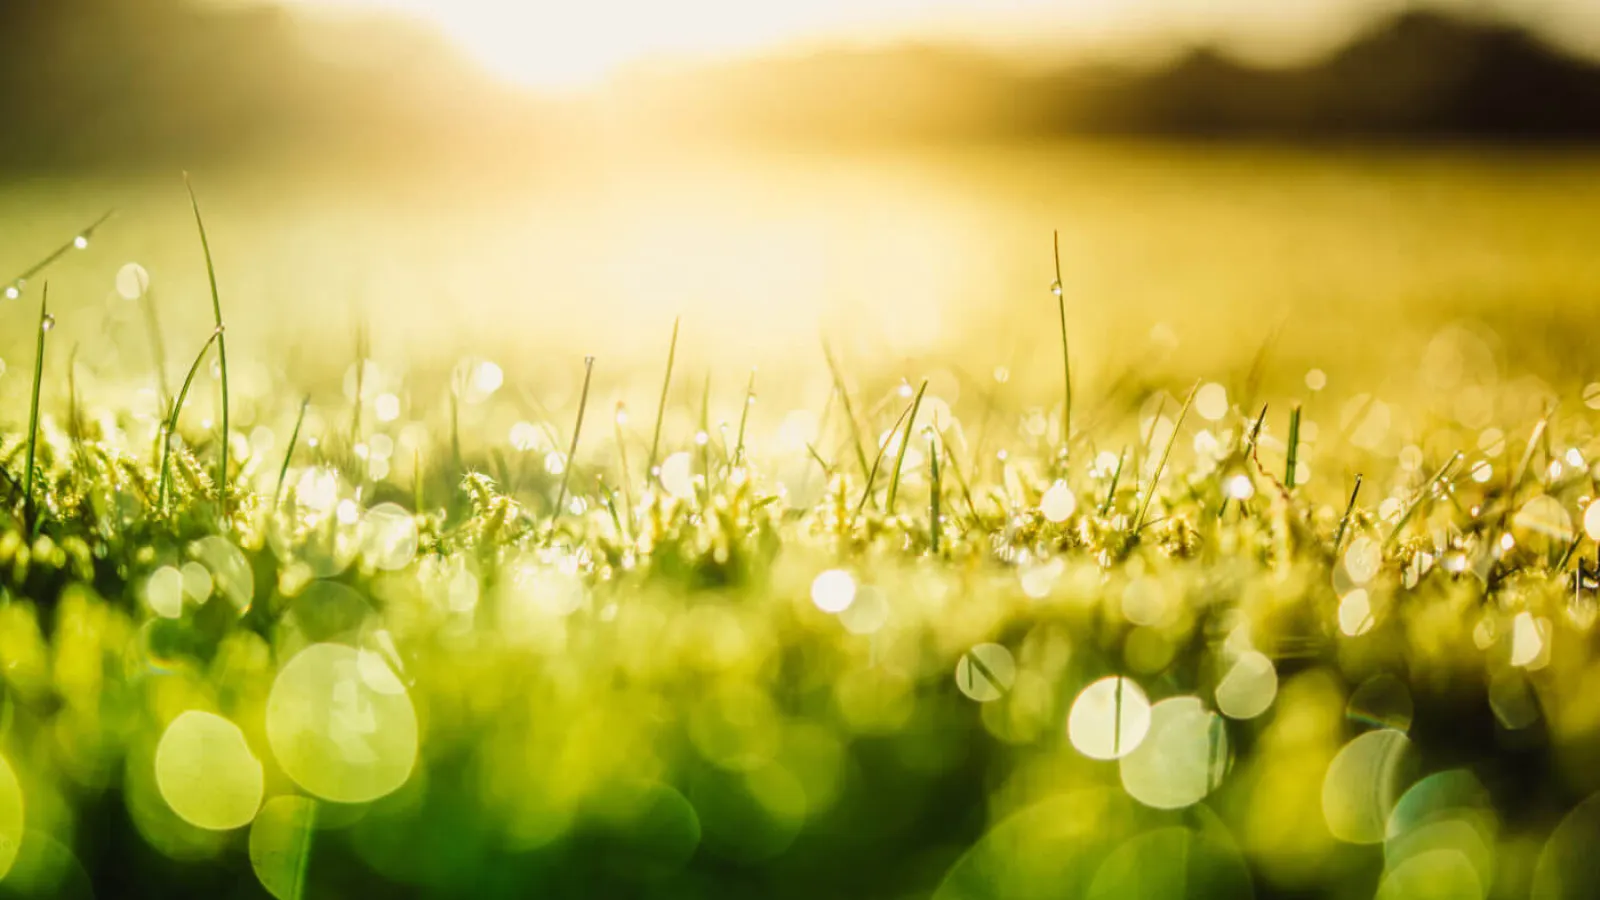 a field of bermuda grass with dew drops and sunlight